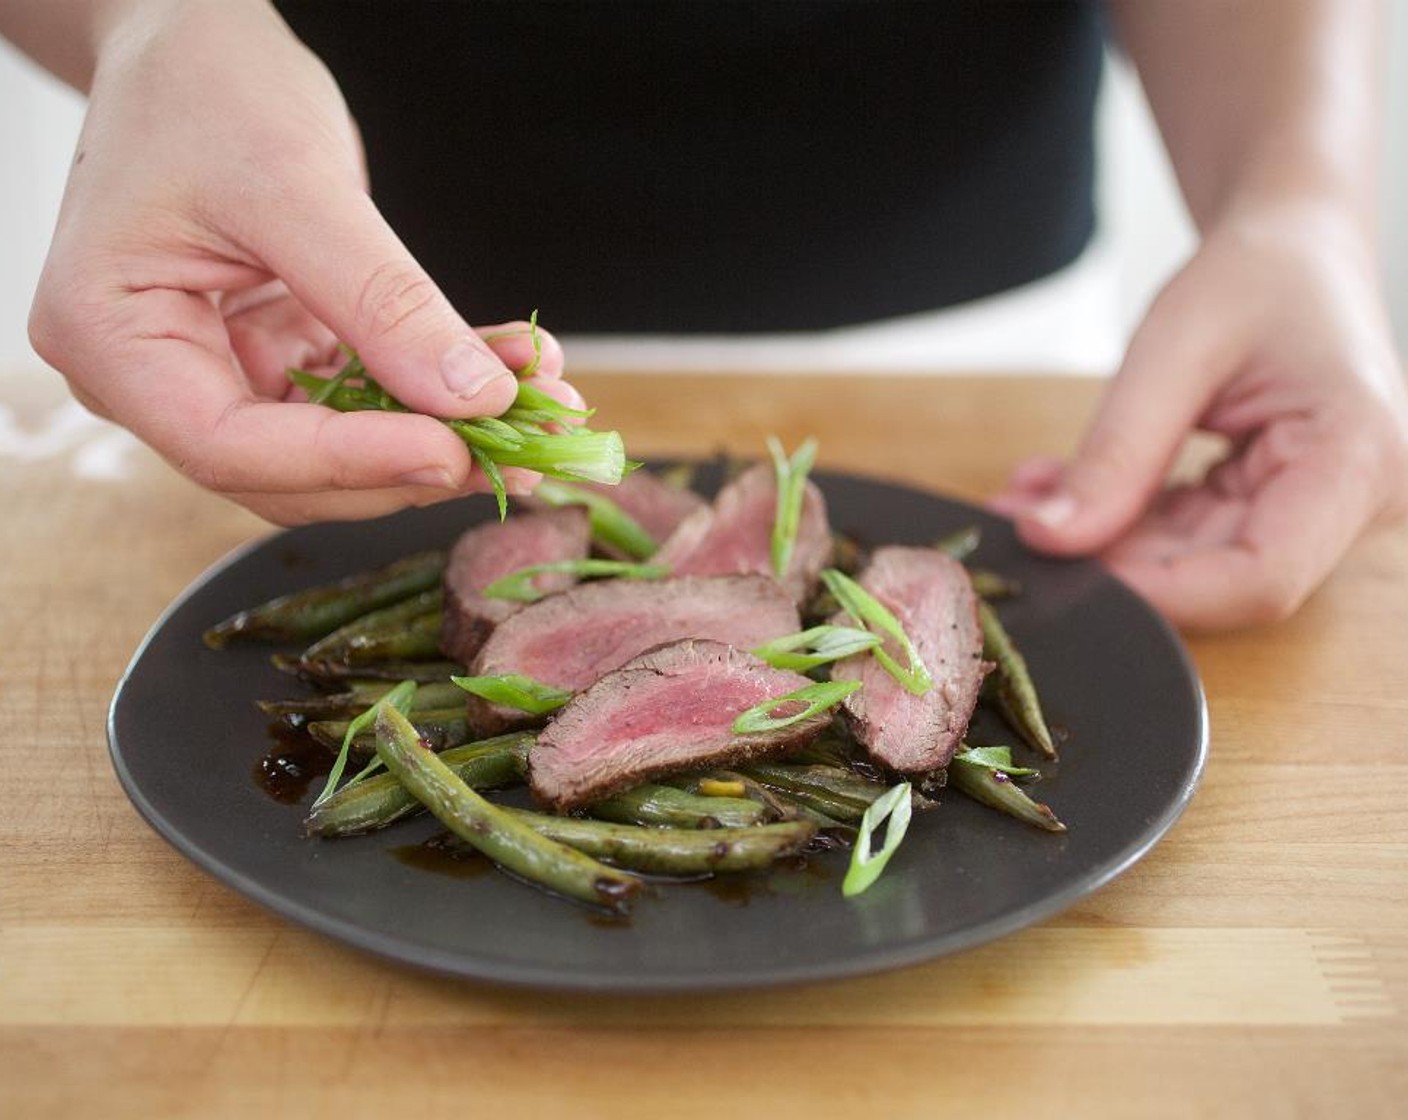 step 14 Divide the green beans evenly between two plates. Arrange the beef tenderloin slices on top of green beans. Garnish with scallions. Serve and enjoy!